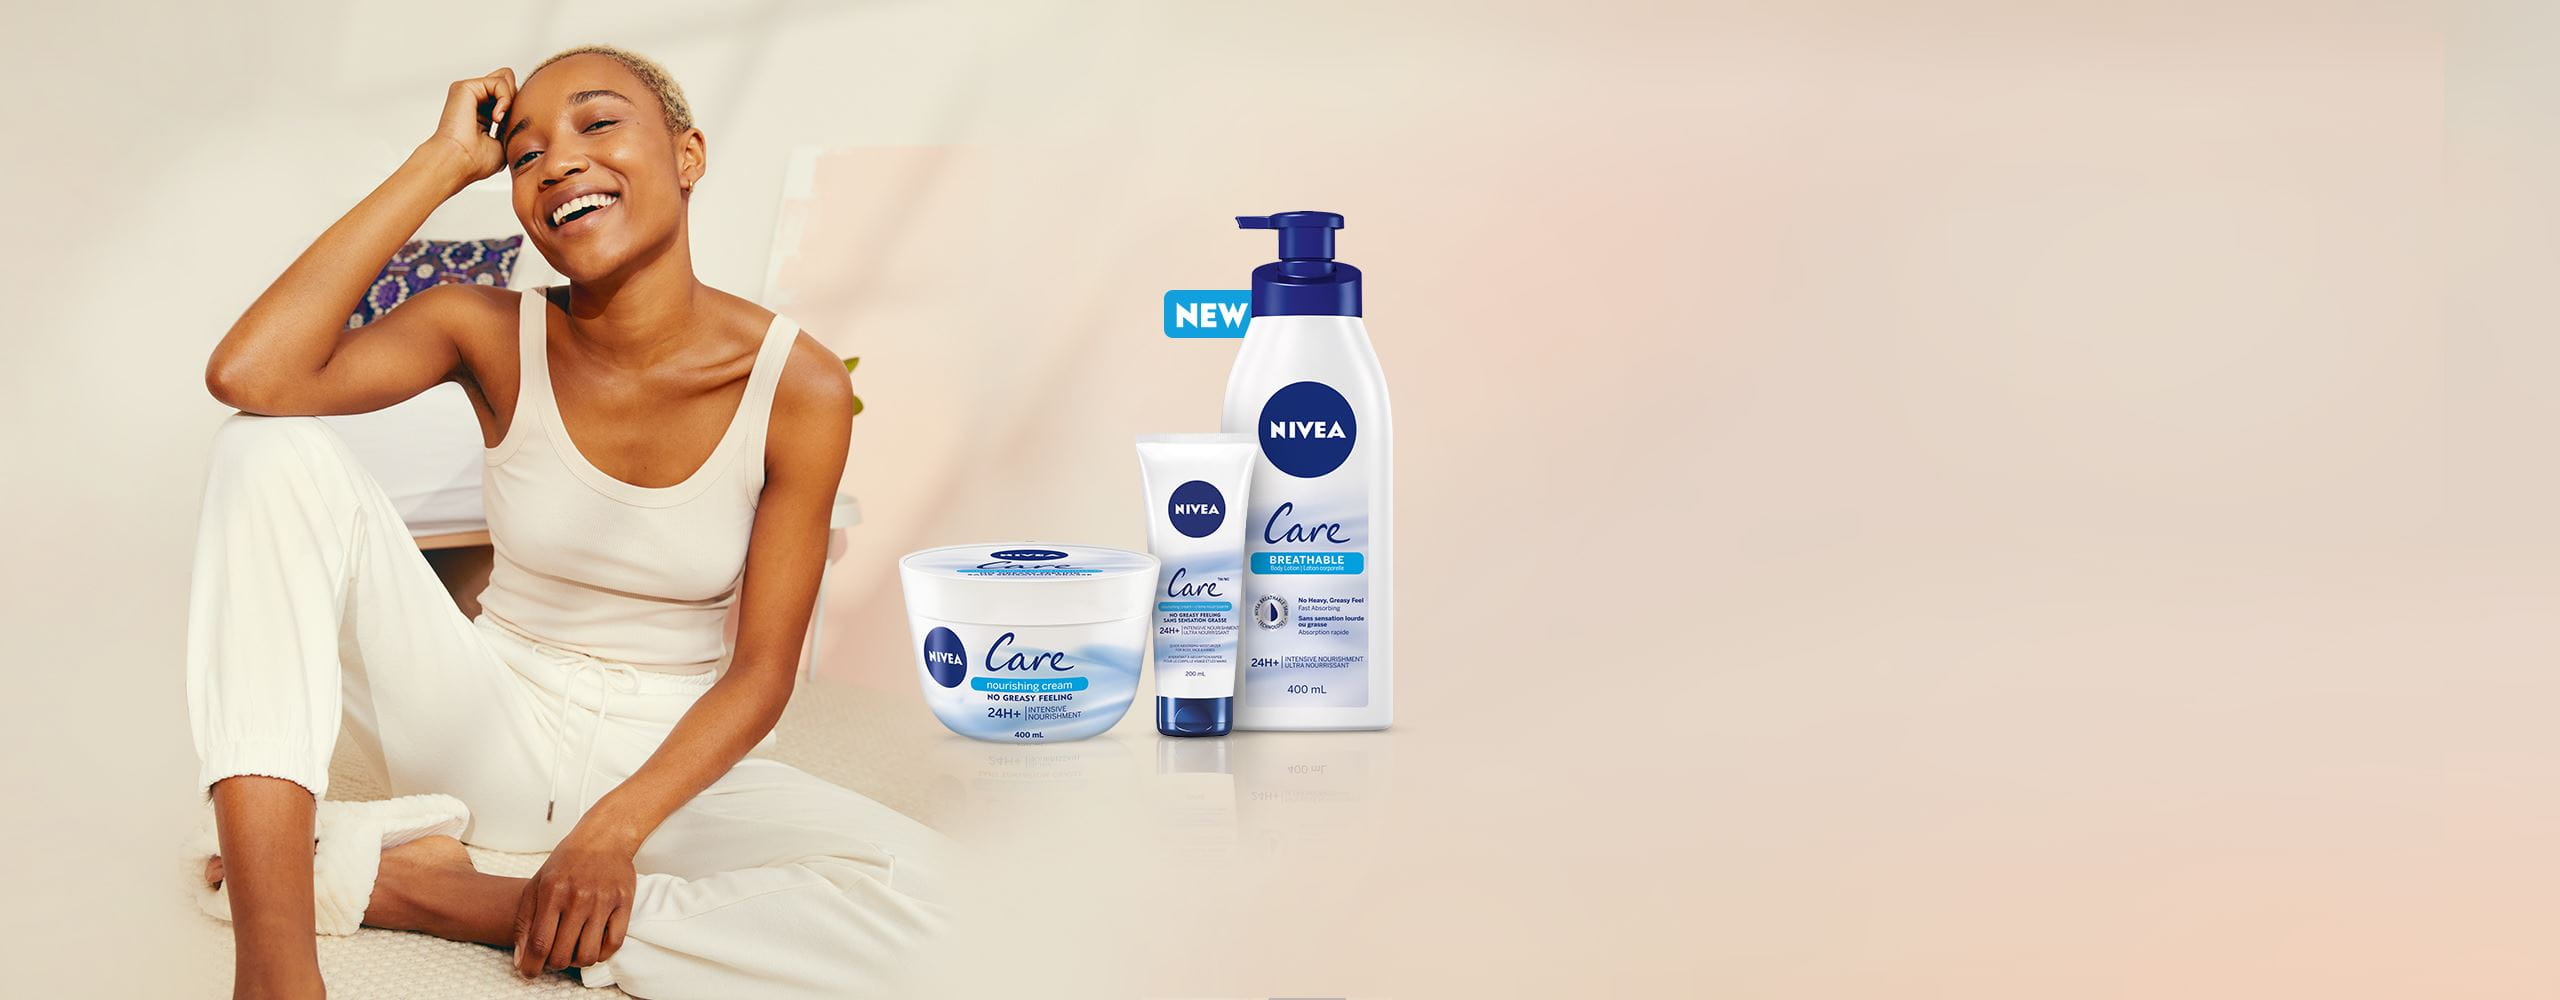 View of three Nivea Care Breathable products with description text and model leaning against blue pillow on a cream background.View of three Nivea Care Breathable products with description text and model leaning against blue pillow on a cream background.